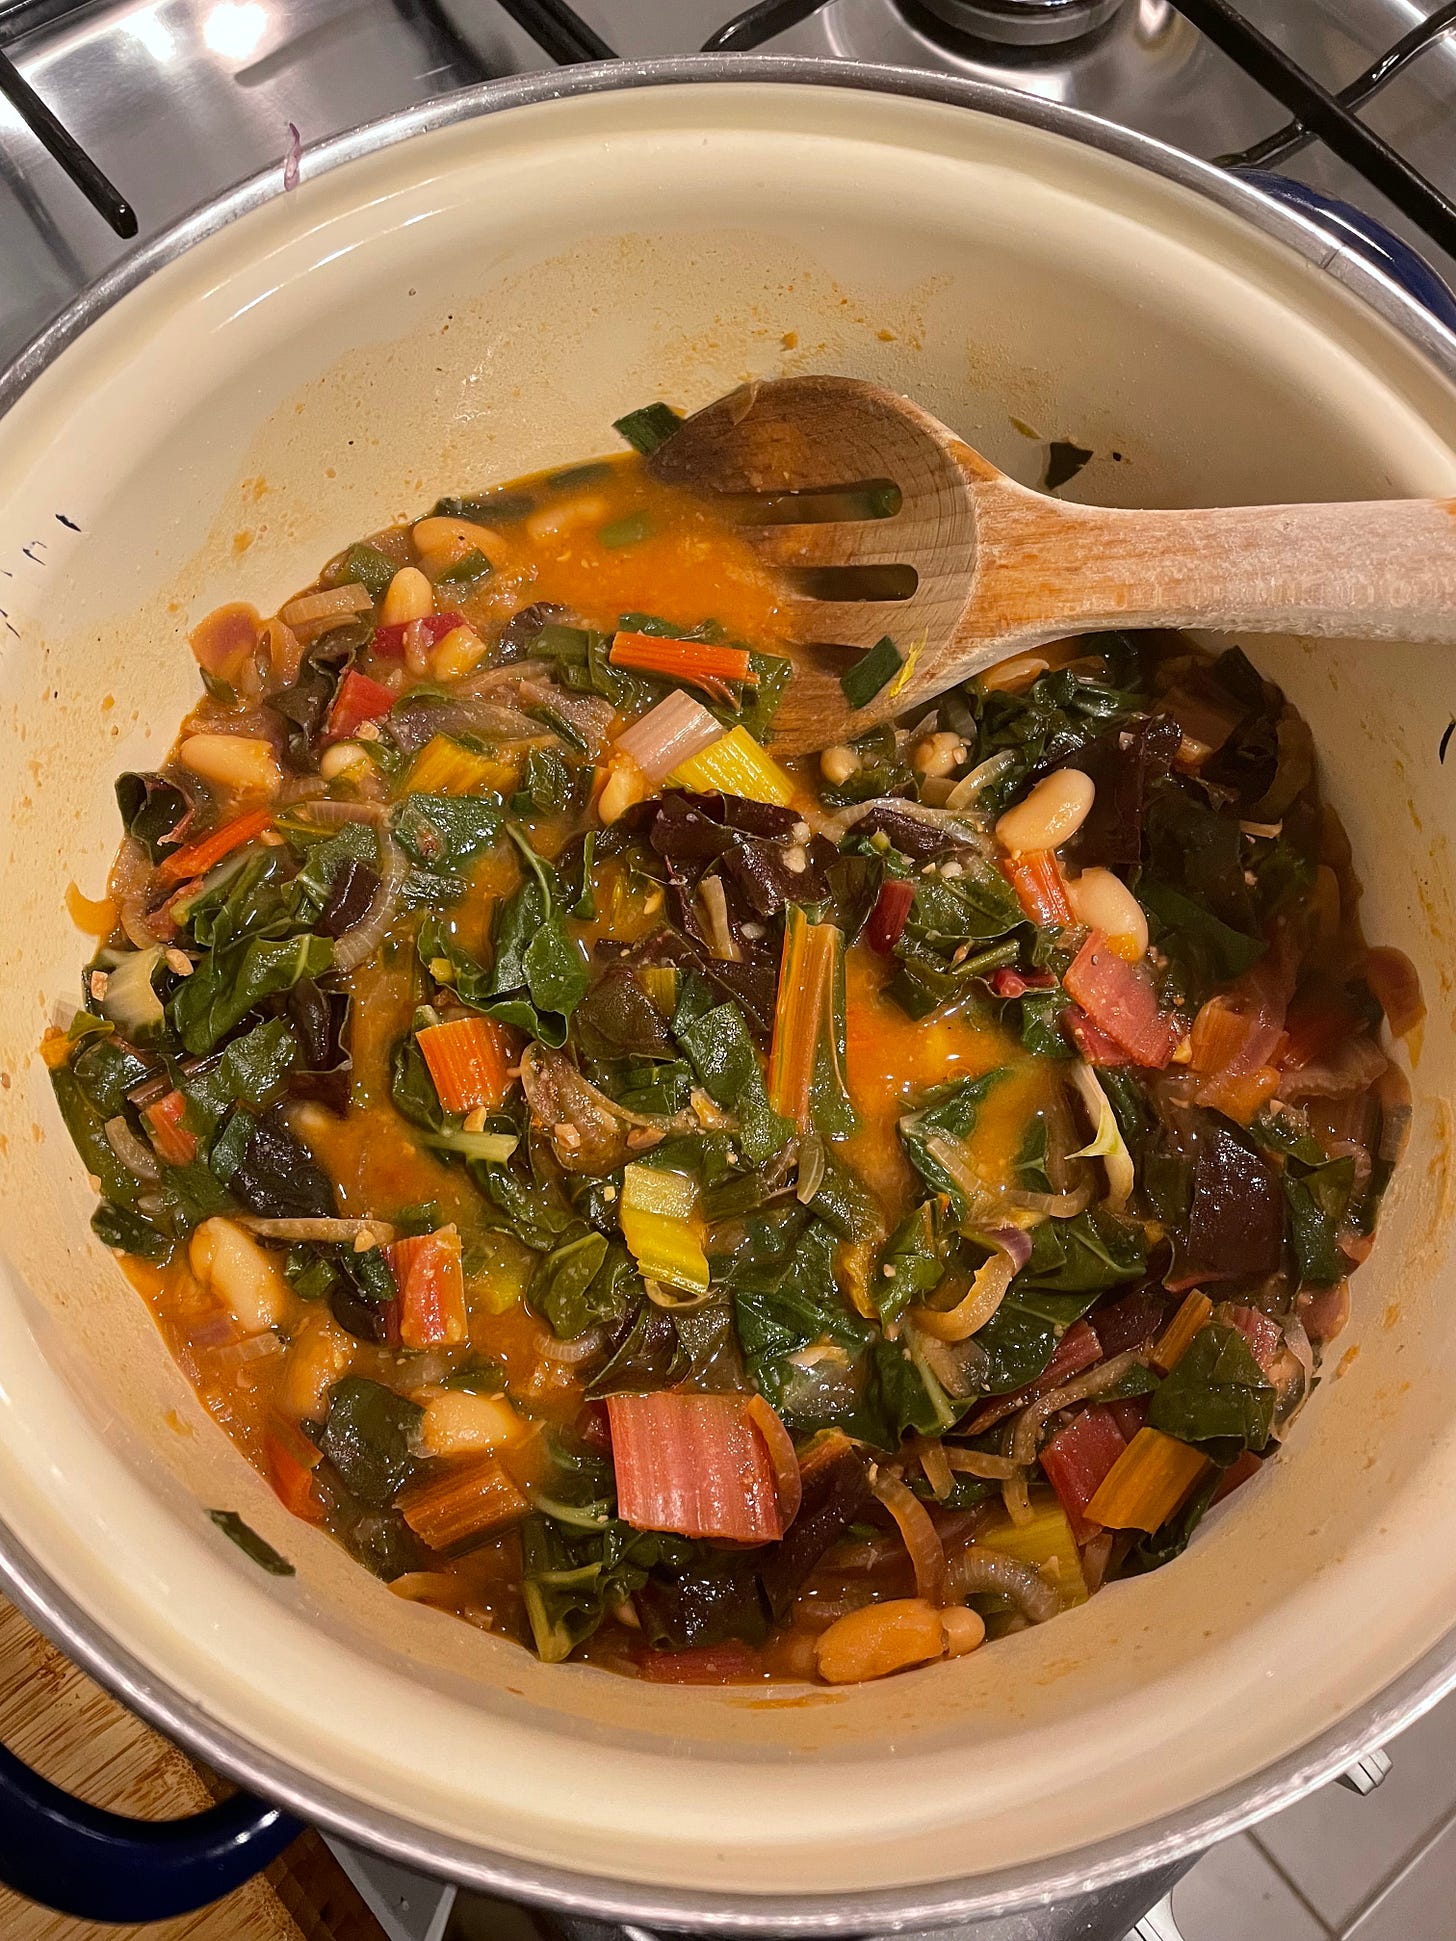 Rainbow chard, tinned beans, and red onion in a stew mixture on the stove.